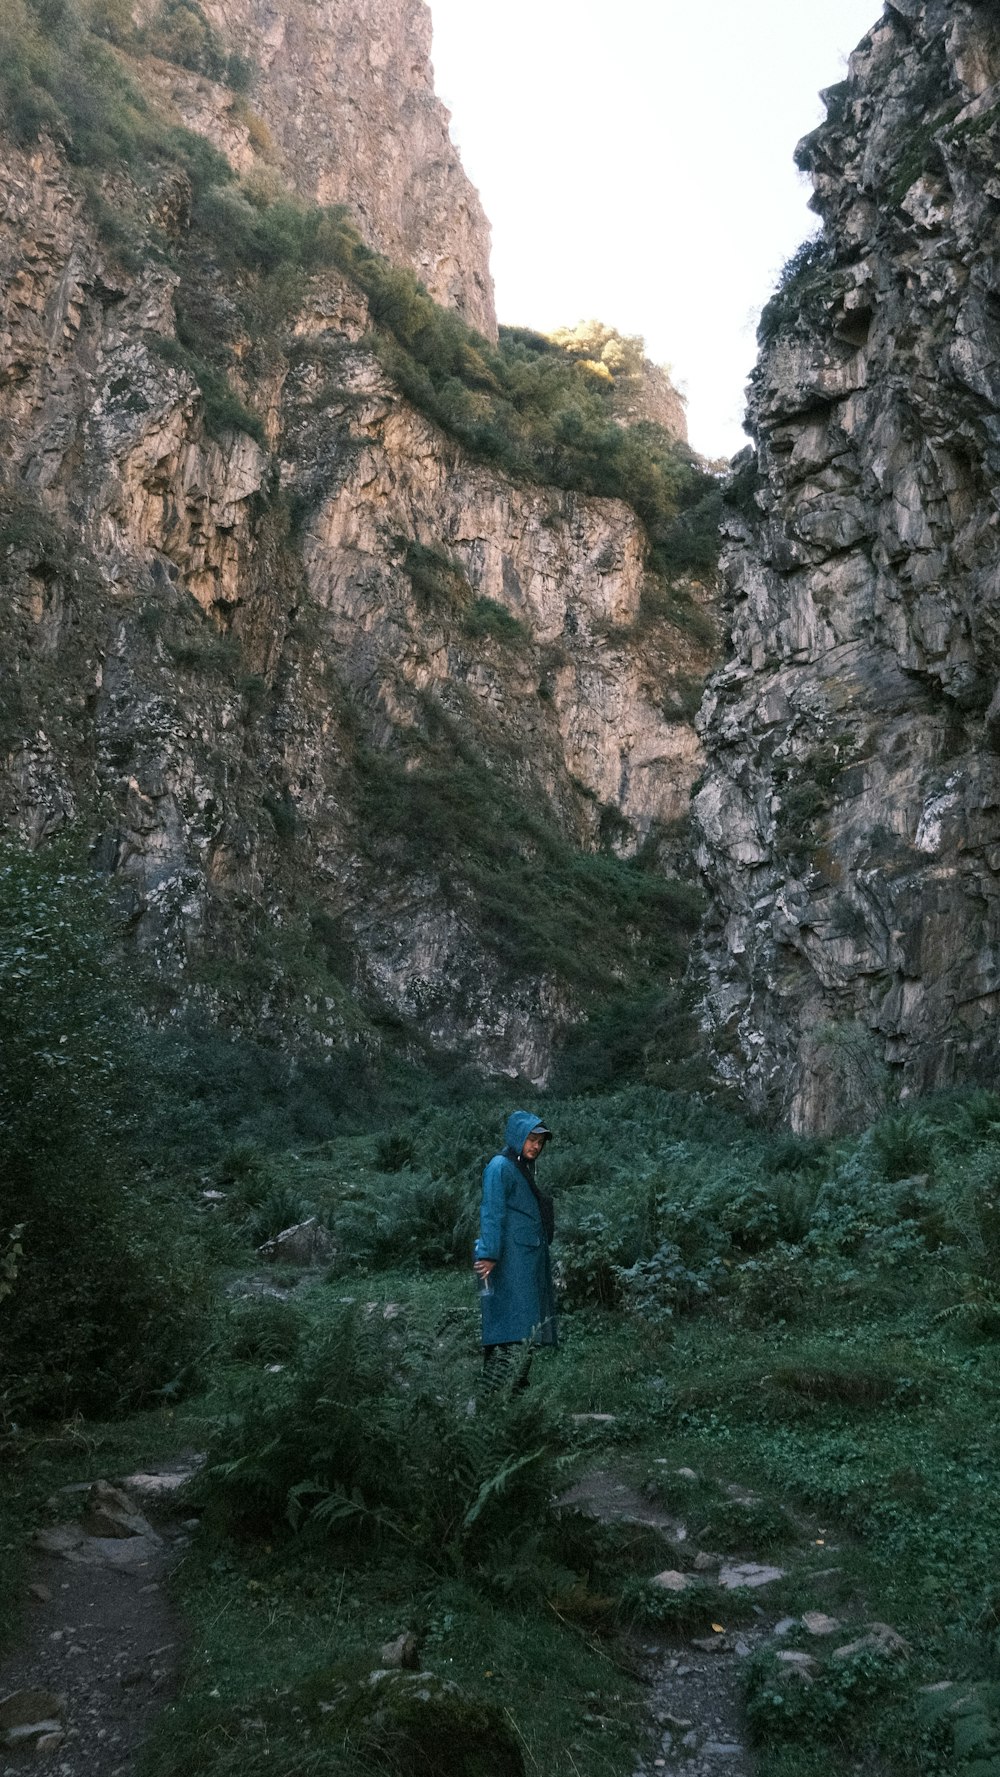 a person in a blue coat standing in a rocky area